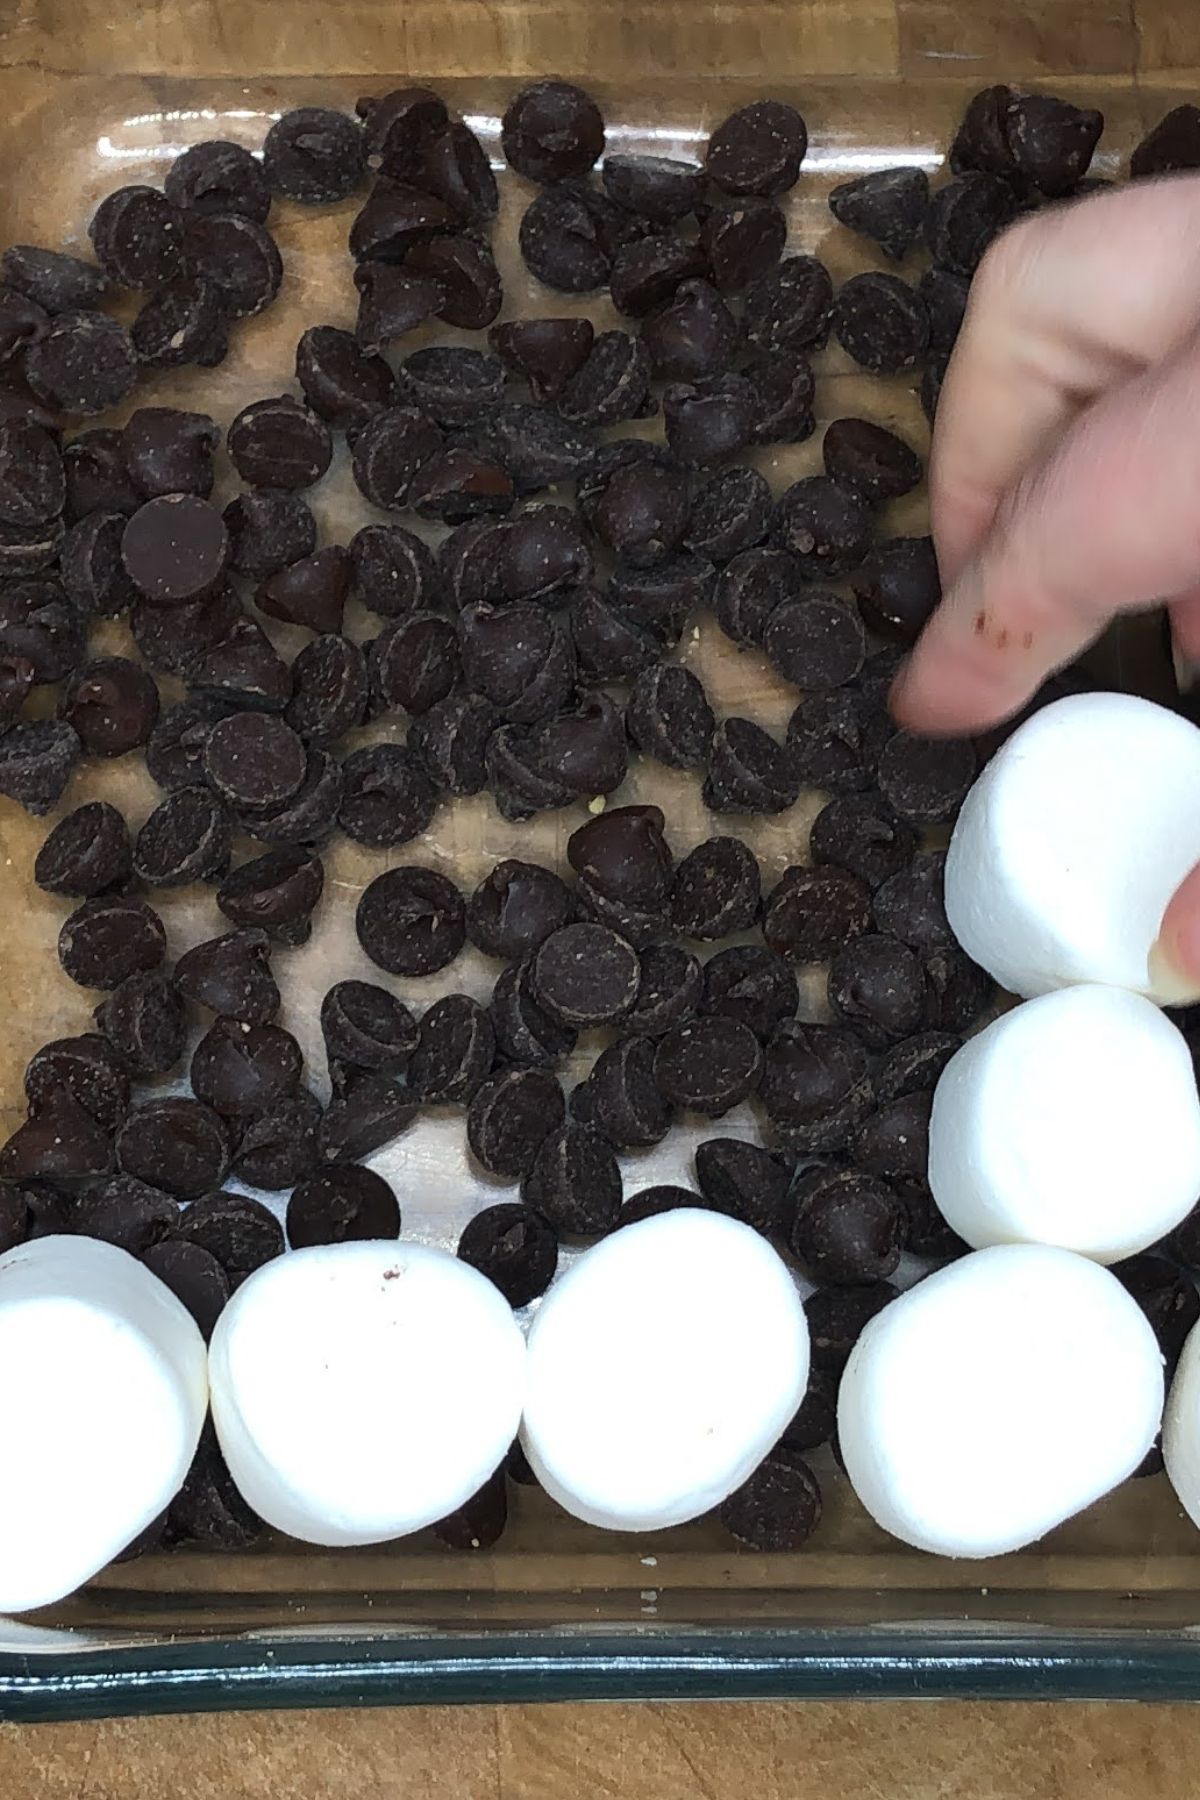 Placing marshmallows on top of chocolate chips in a pan.